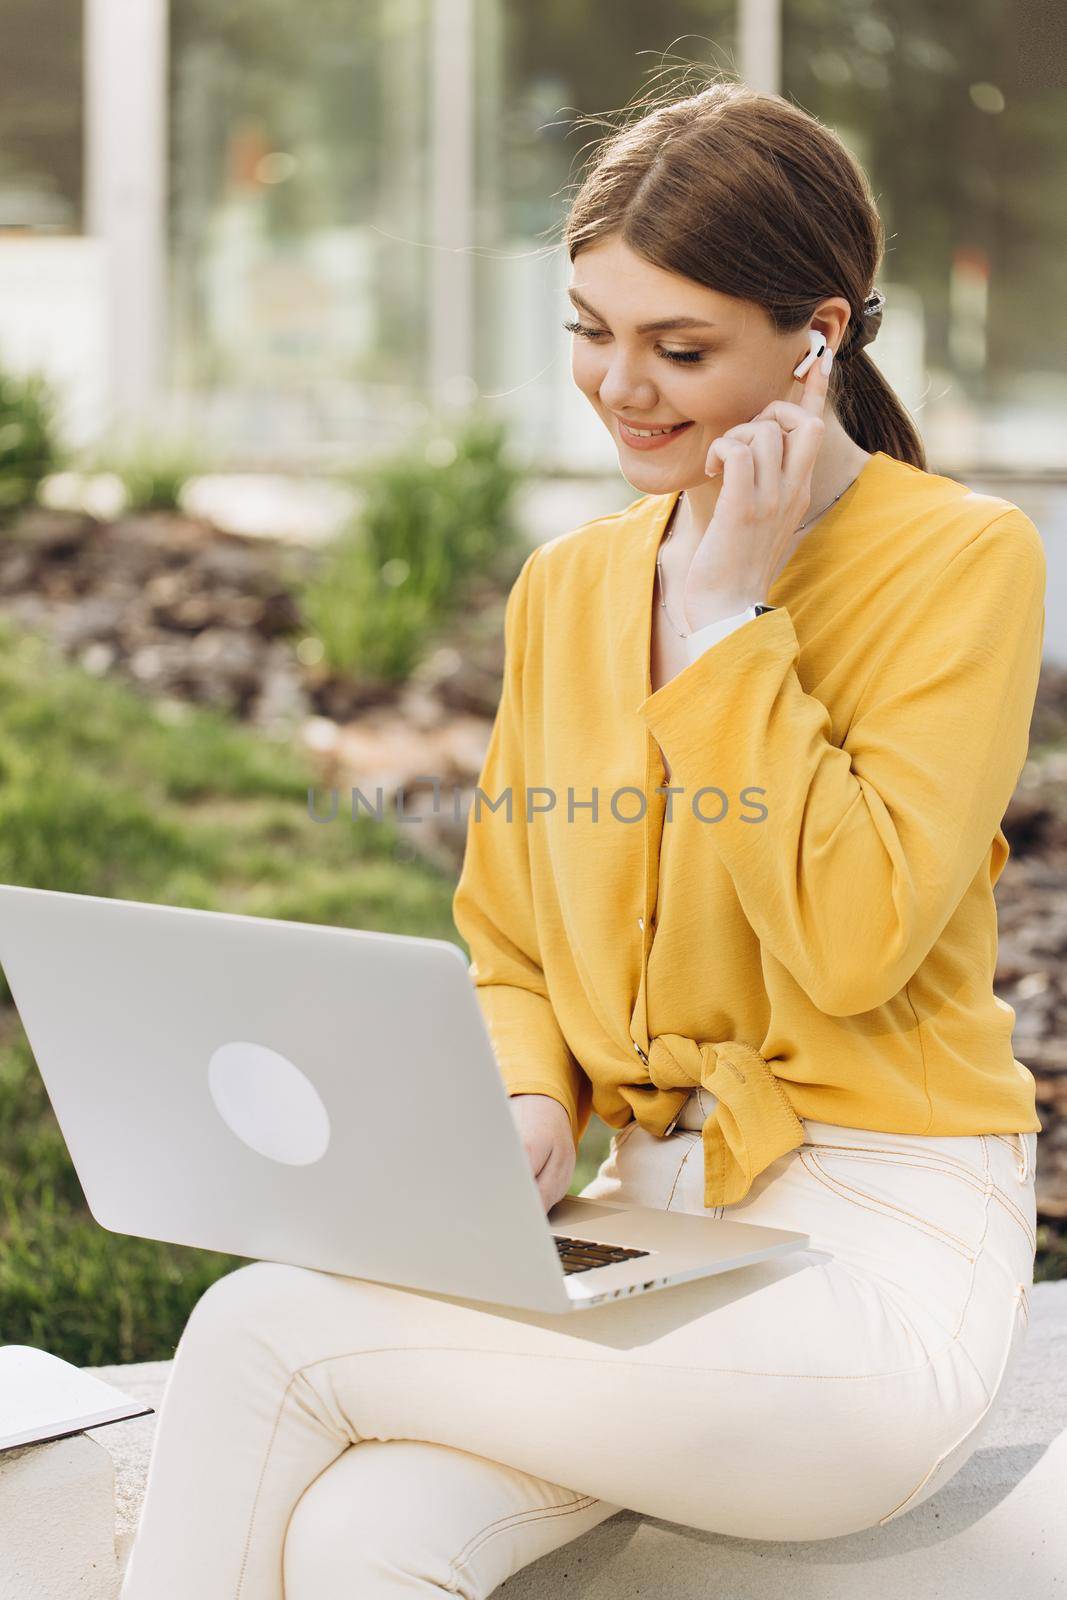 Portrait of smiling business woman looking at laptop screen. Focused businesswoman using wireless earphones working on laptop computer near modern office. Female manager typing on laptop keyboard.